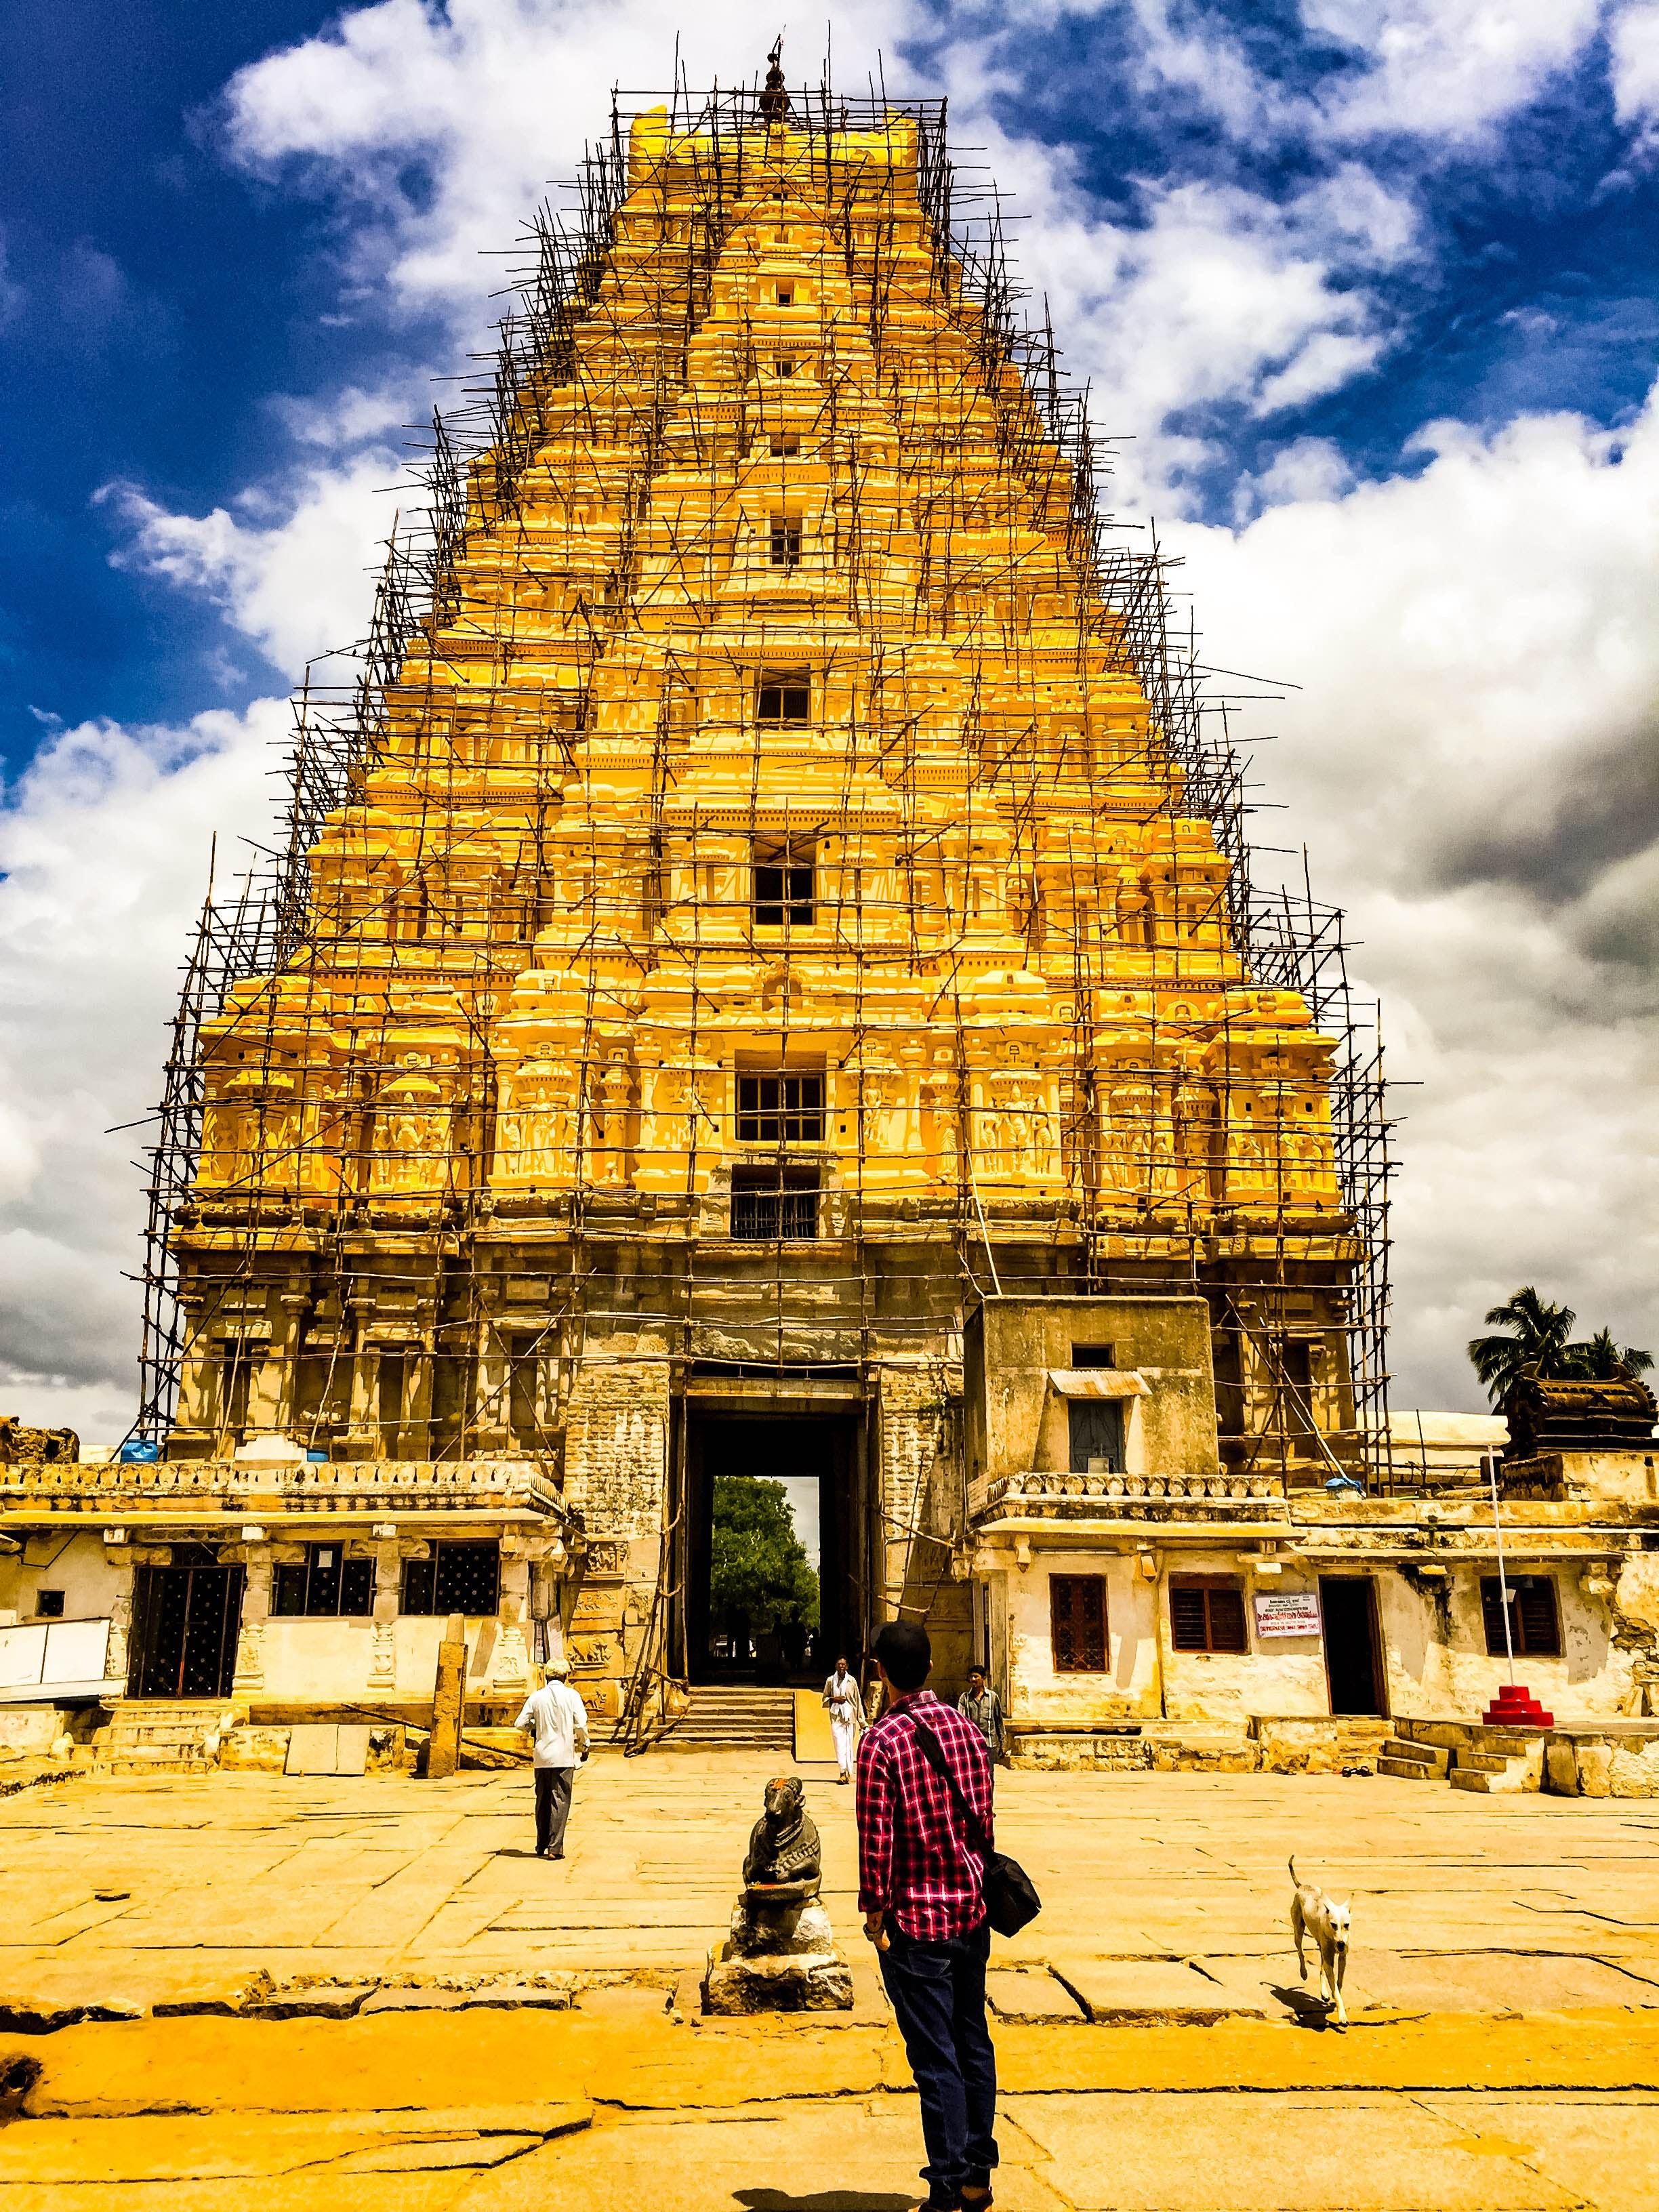 Landmark,Temple,Place of worship,Hindu temple,Building,Historic site,Architecture,Sky,Temple,Ancient history